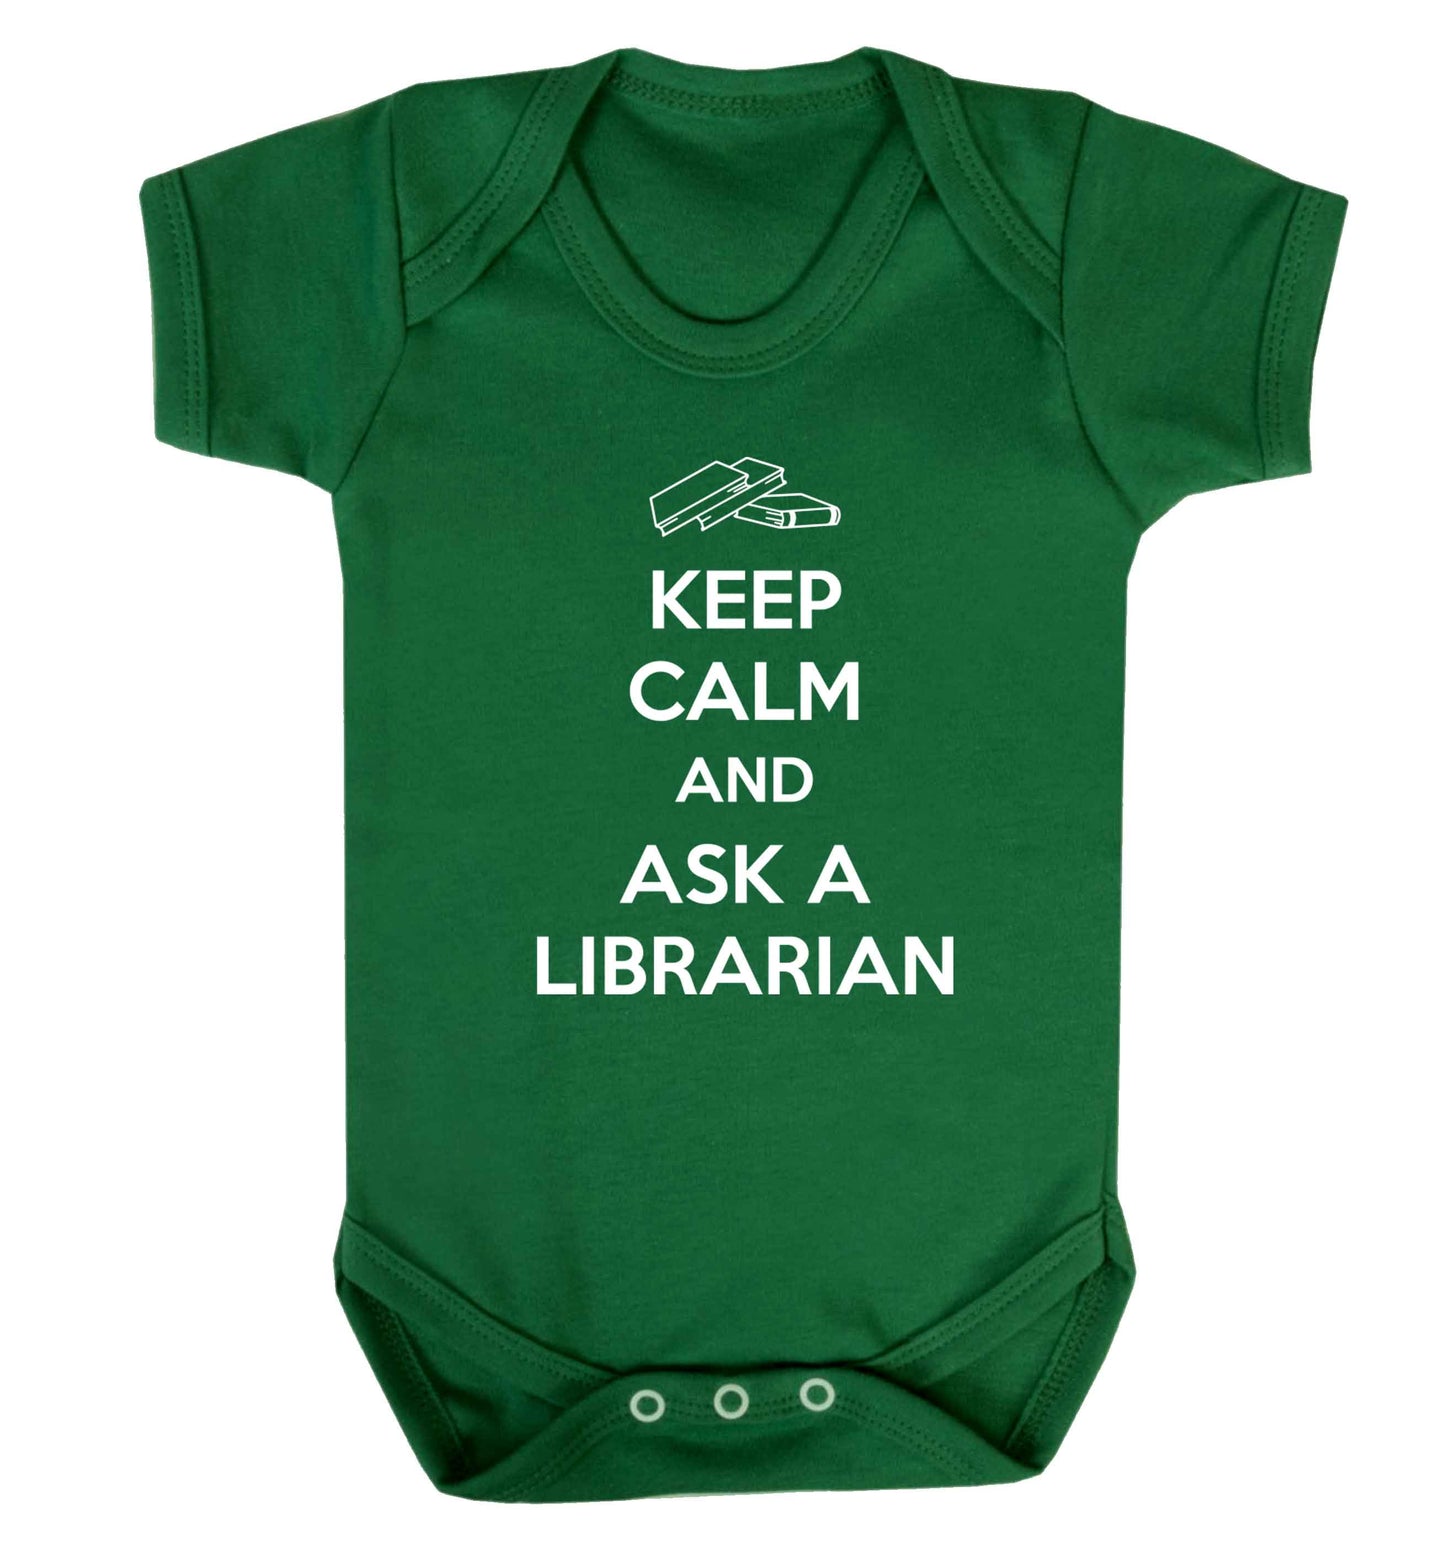 Keep calm and ask a librarian Baby Vest green 18-24 months